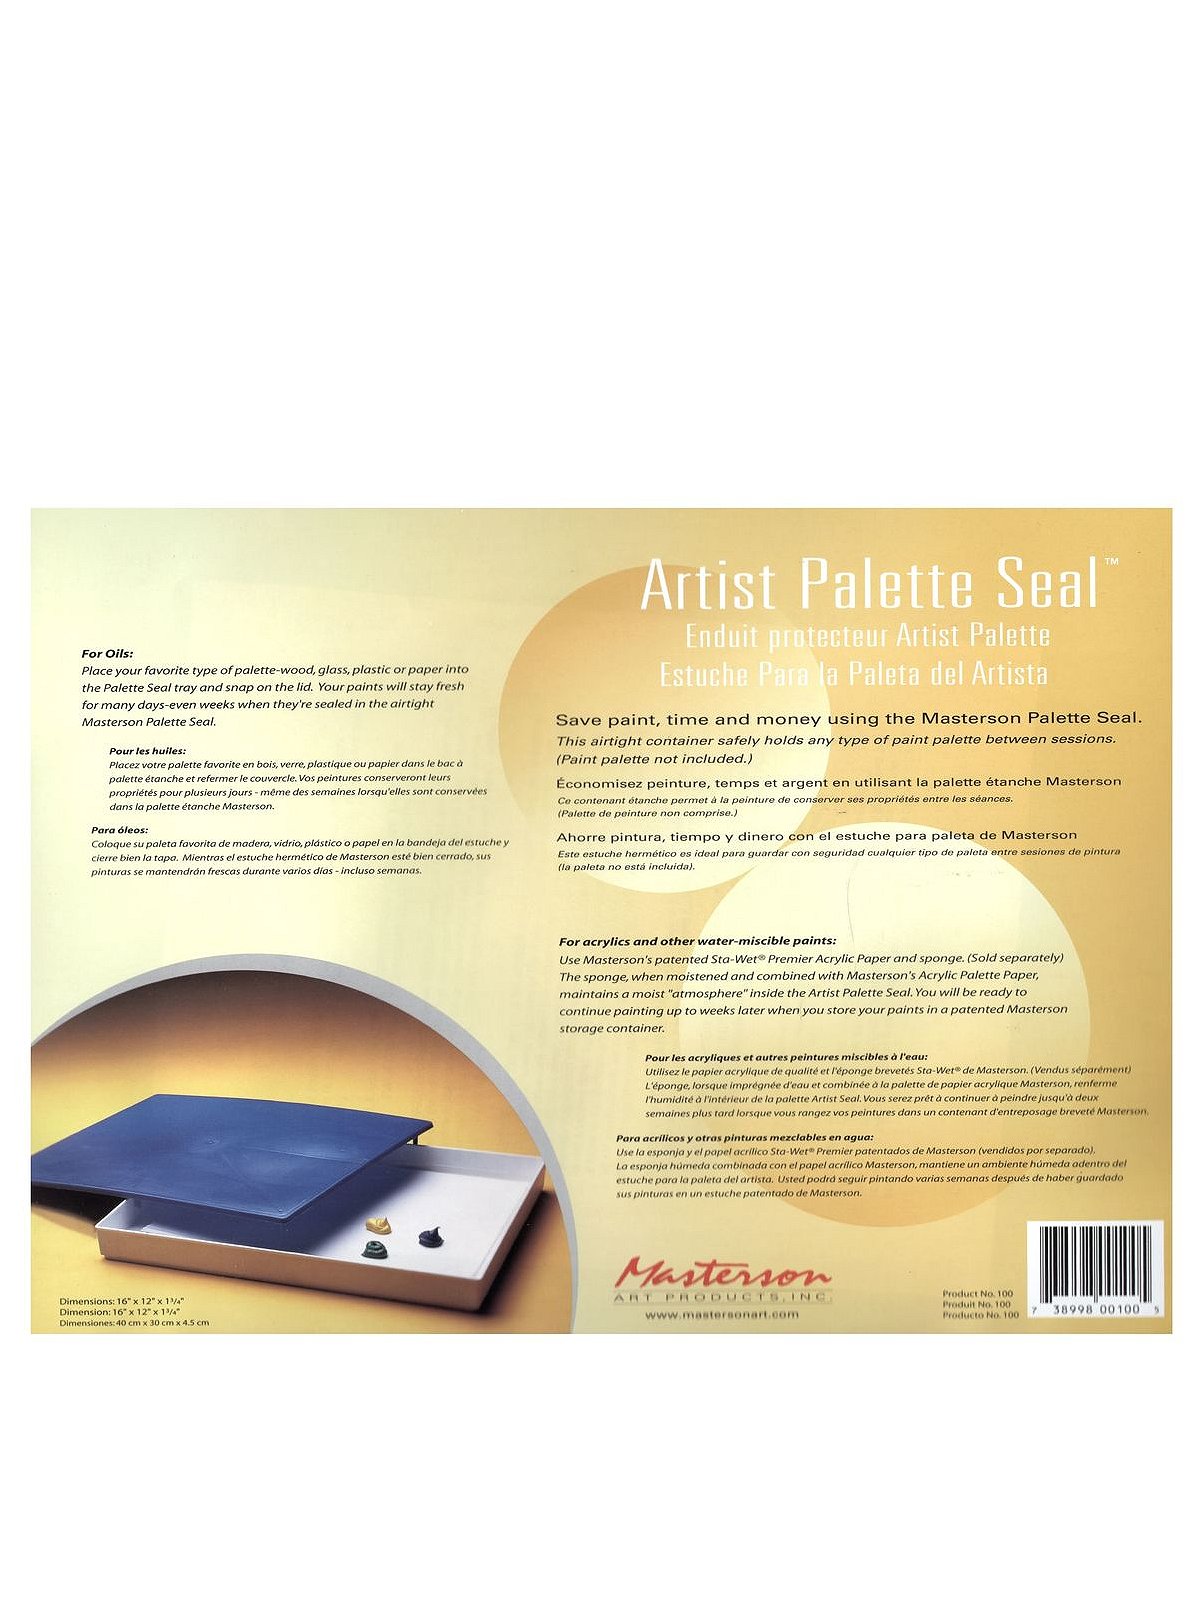 Number 1 in Service masterson sta-wet paint palette with airtight